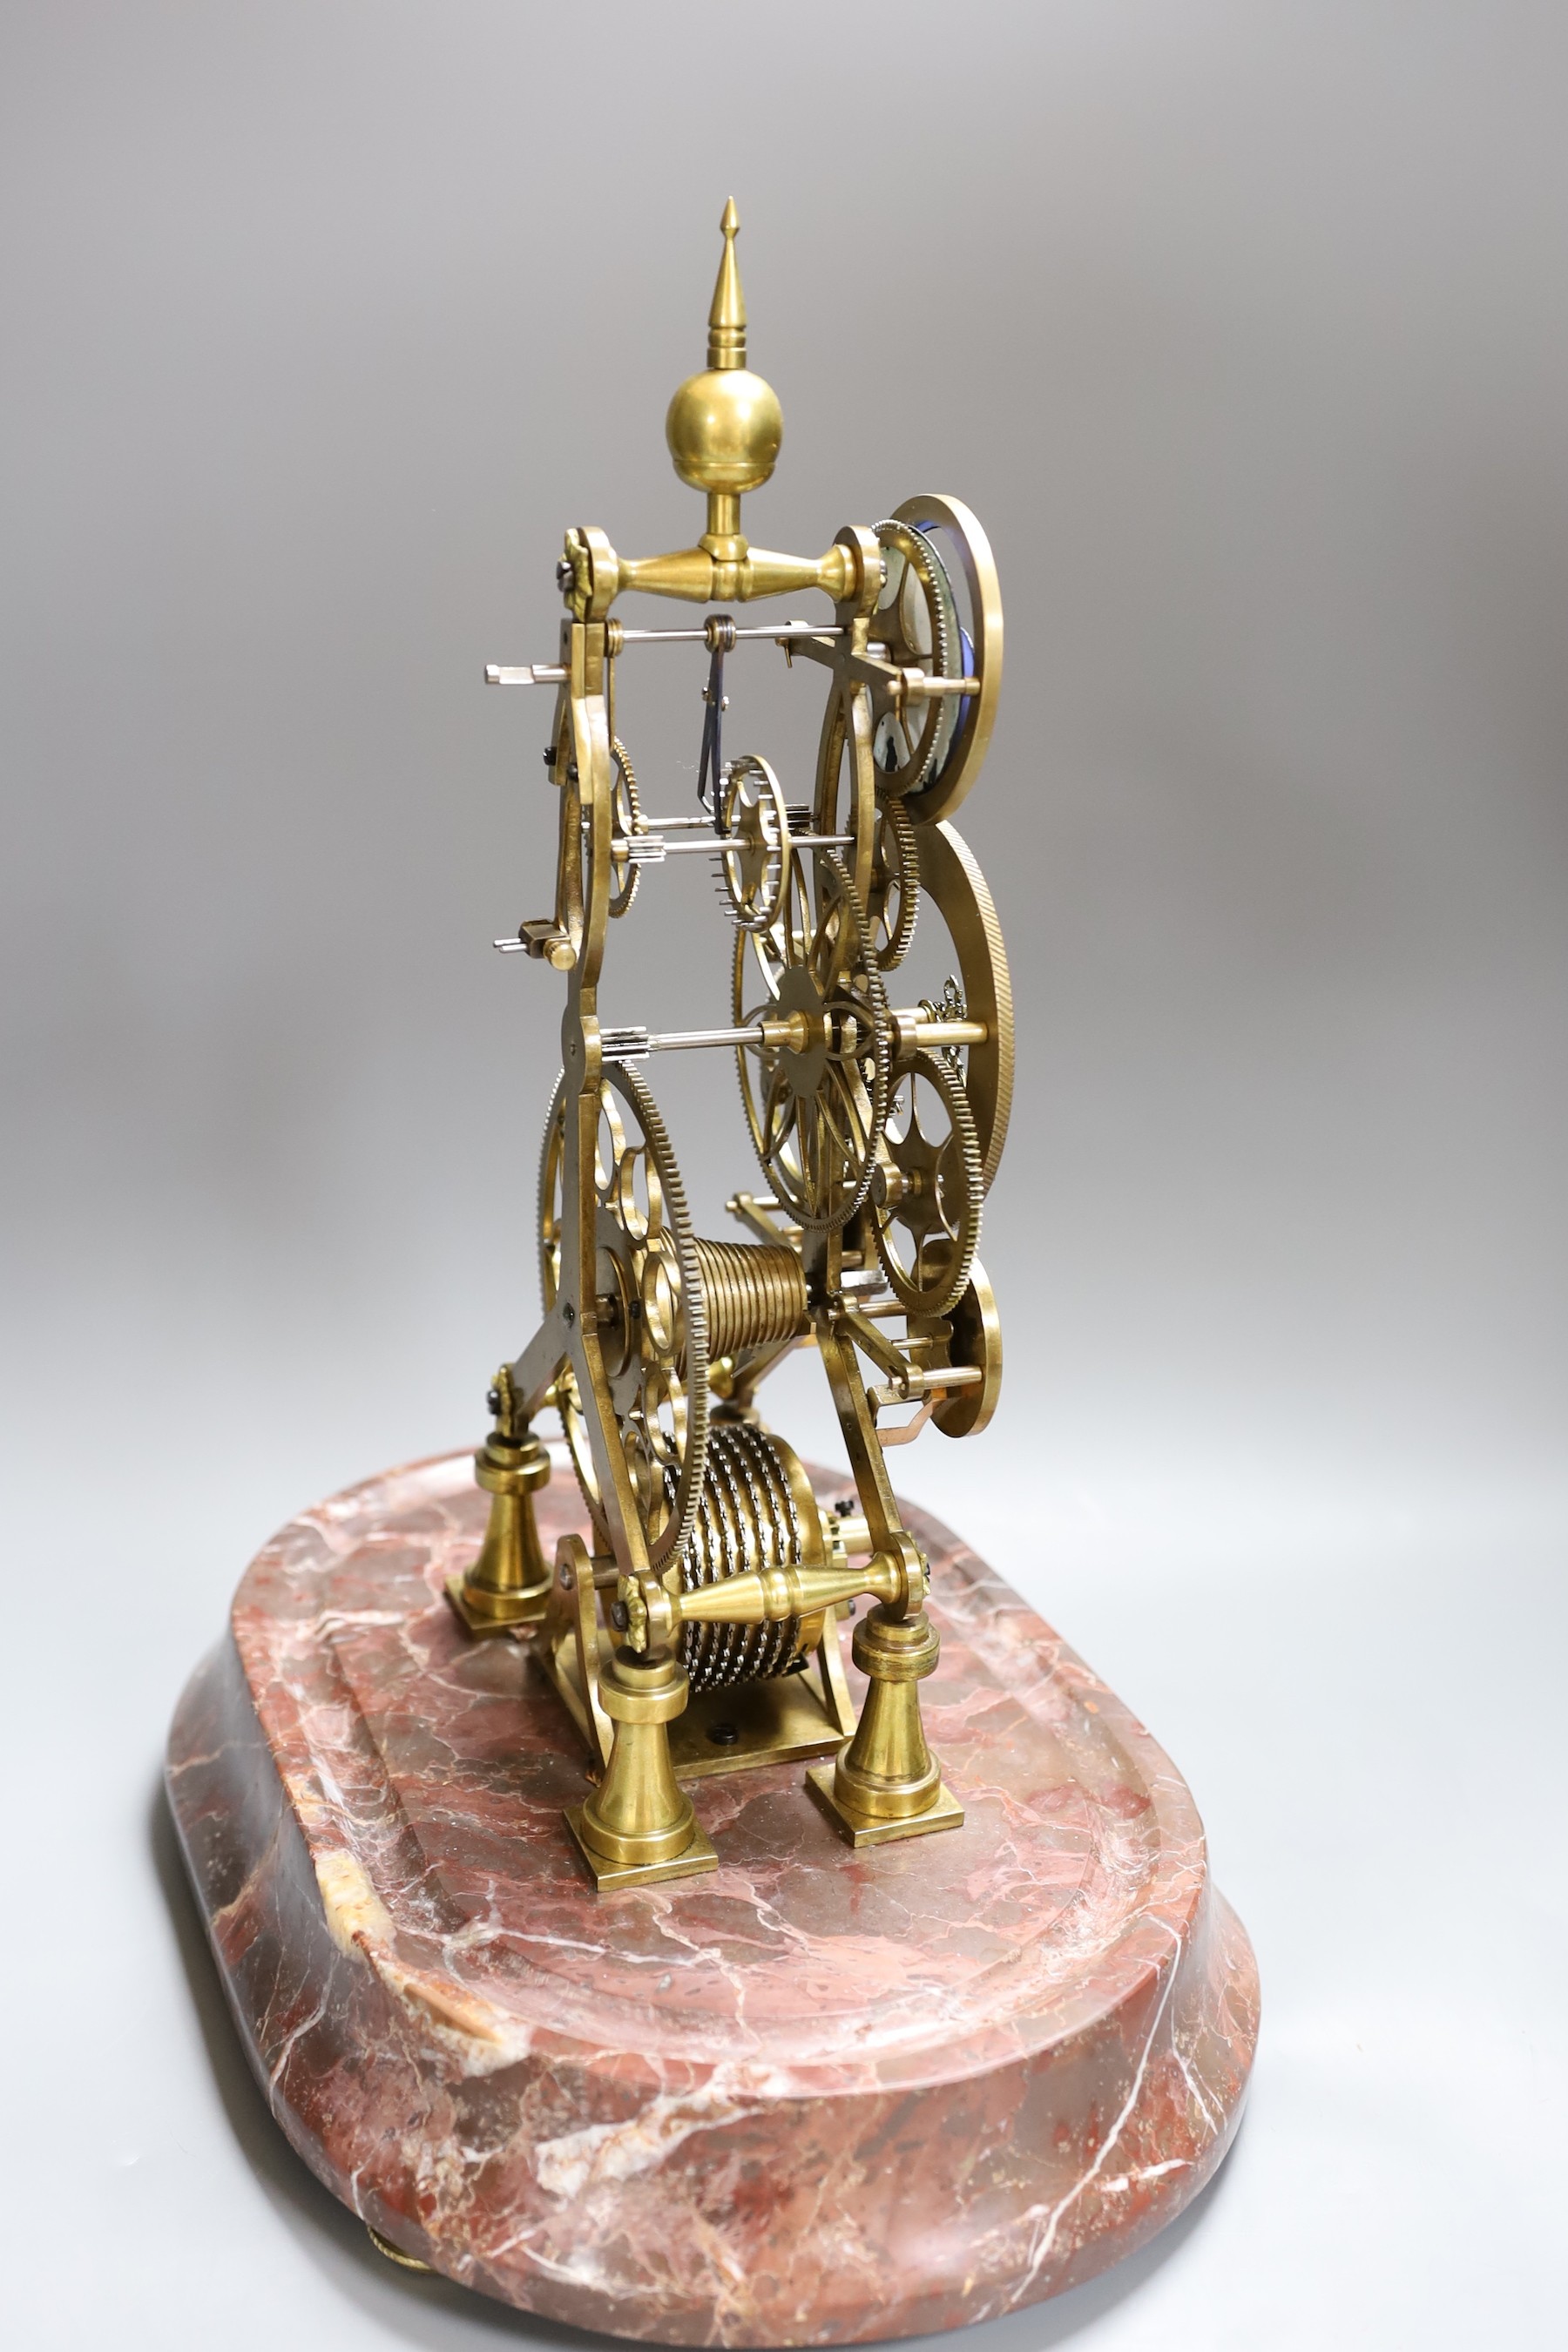 A calendar skeleton clock with moon phase dial, pin wheel escapement, dial signed Franz Denk in Wien, with pendulum, 50cm tall including dome